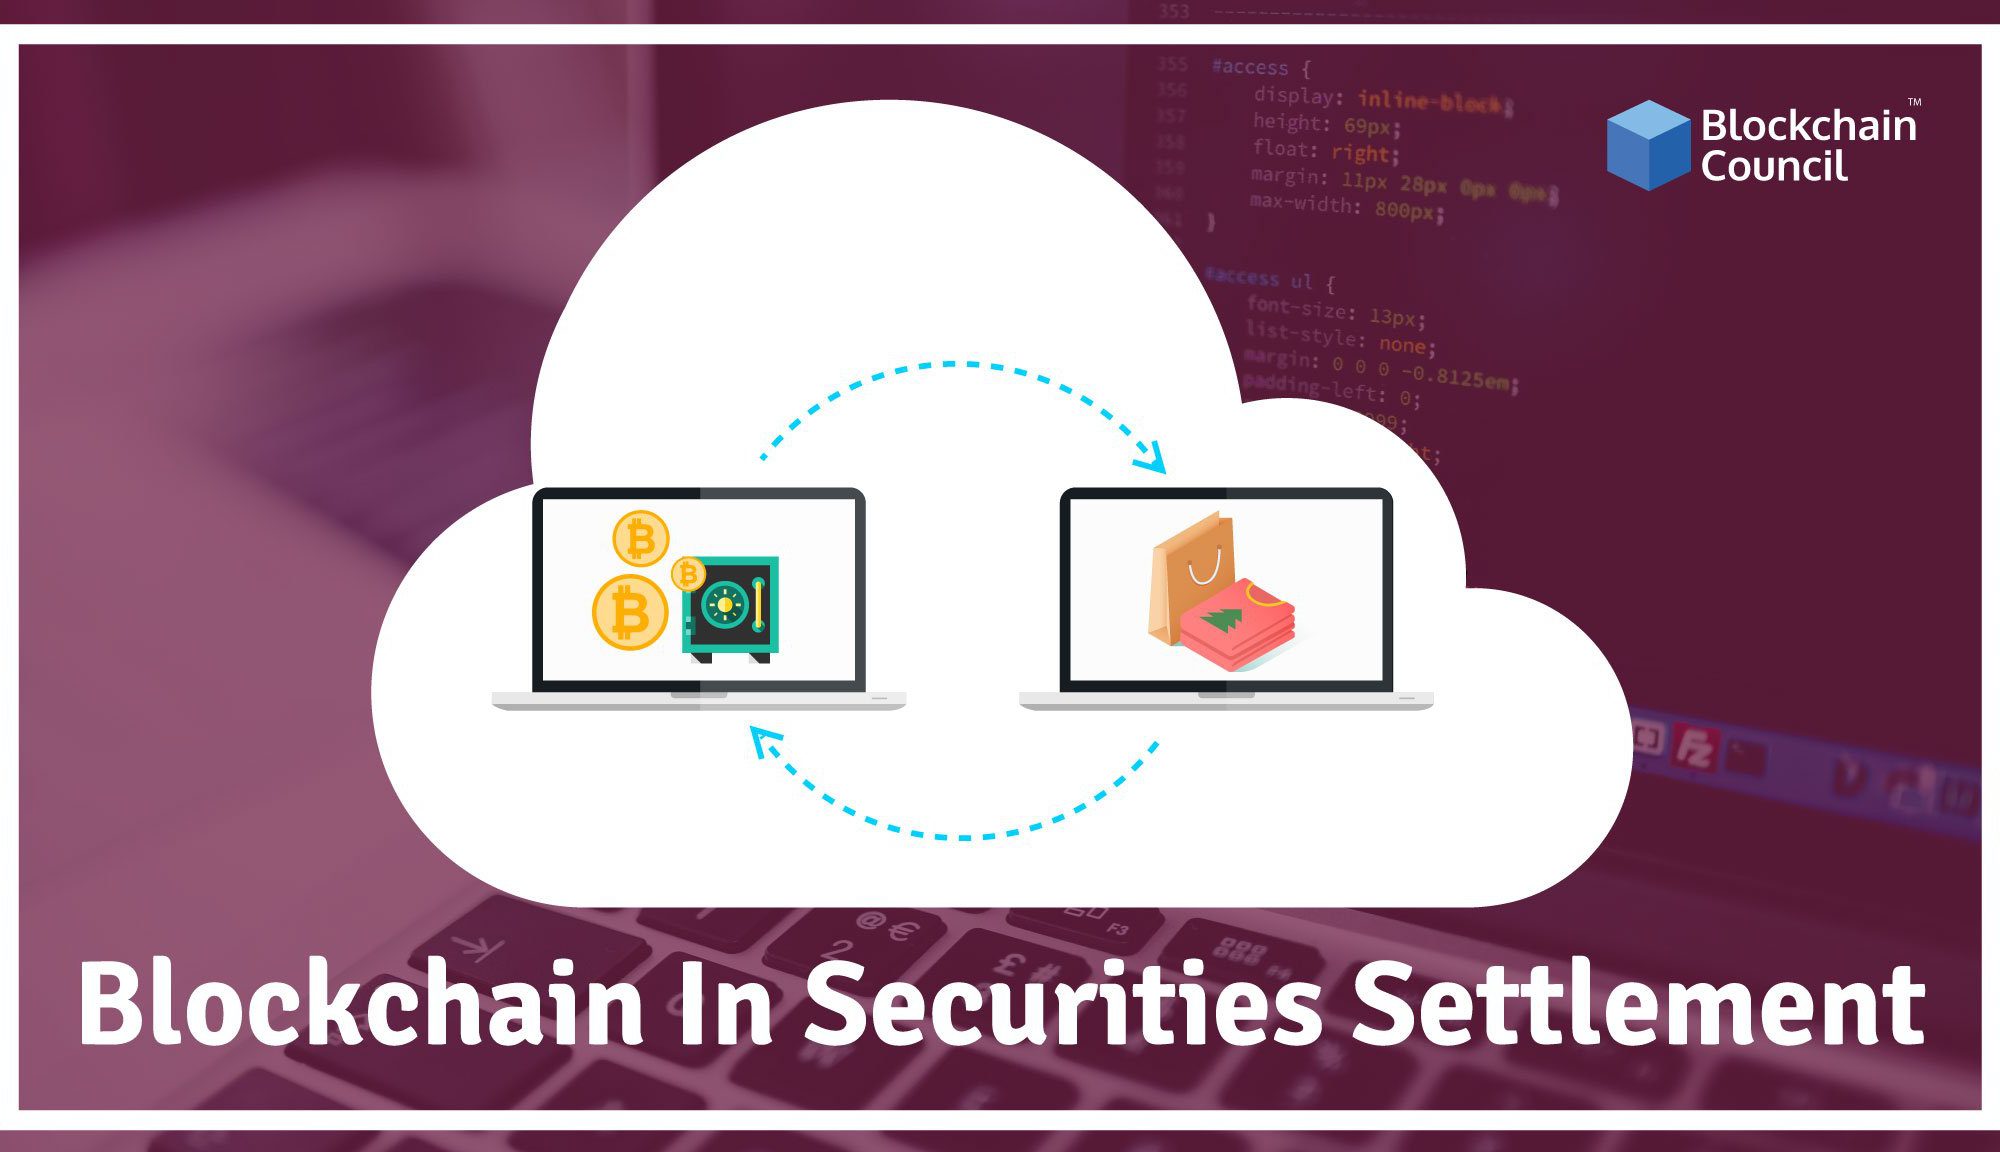 how-blockchain-can-be-used-in-securities-settlement-and-how-it-works